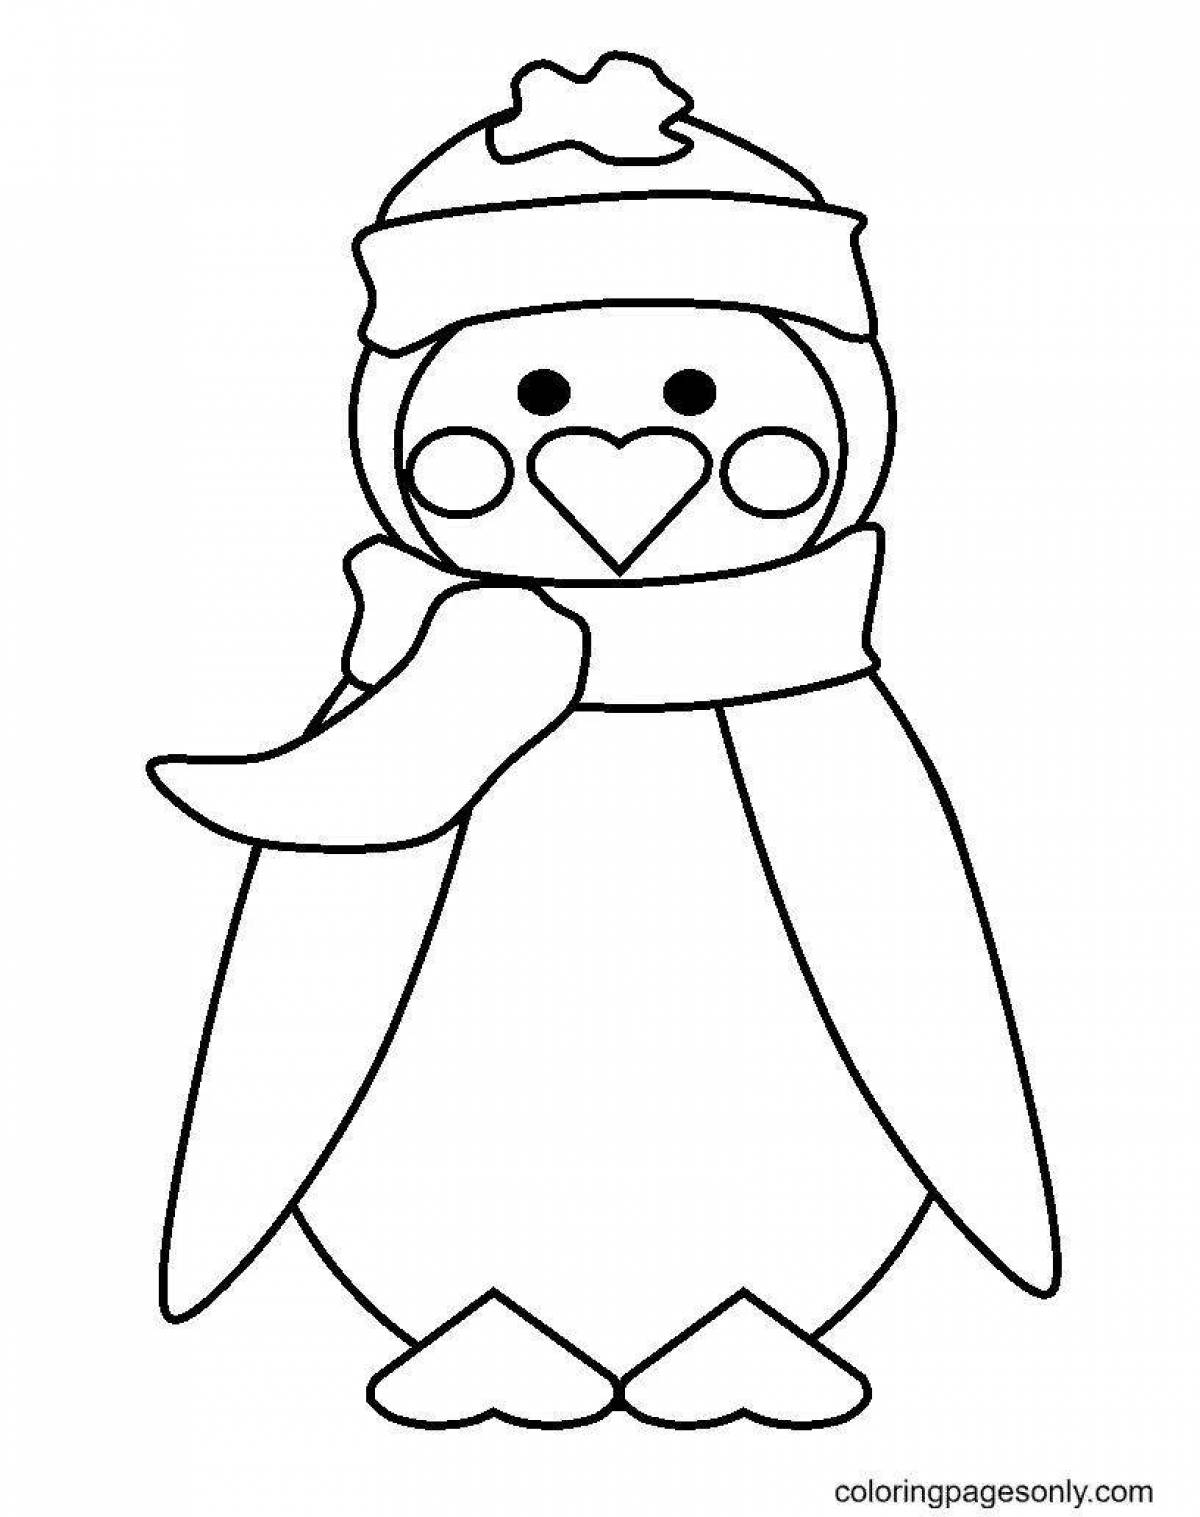 Coloring page playful christmas penguin